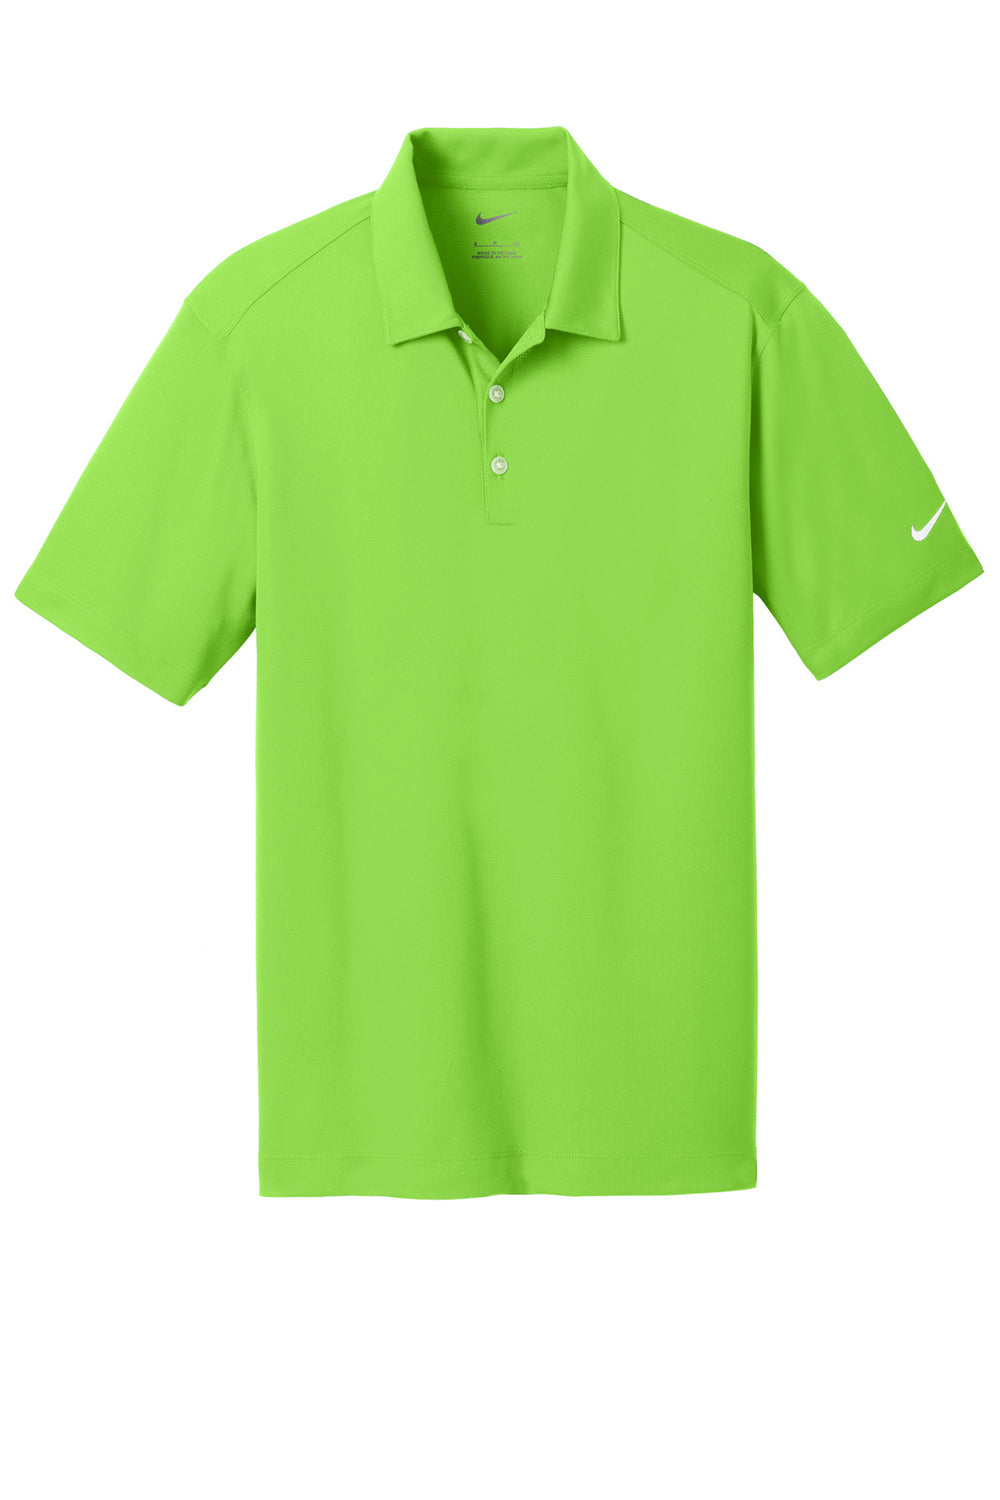 Nike 637167 Mens Dri-Fit Moisture Wicking Short Sleeve Polo Shirt Action Green Flat Front